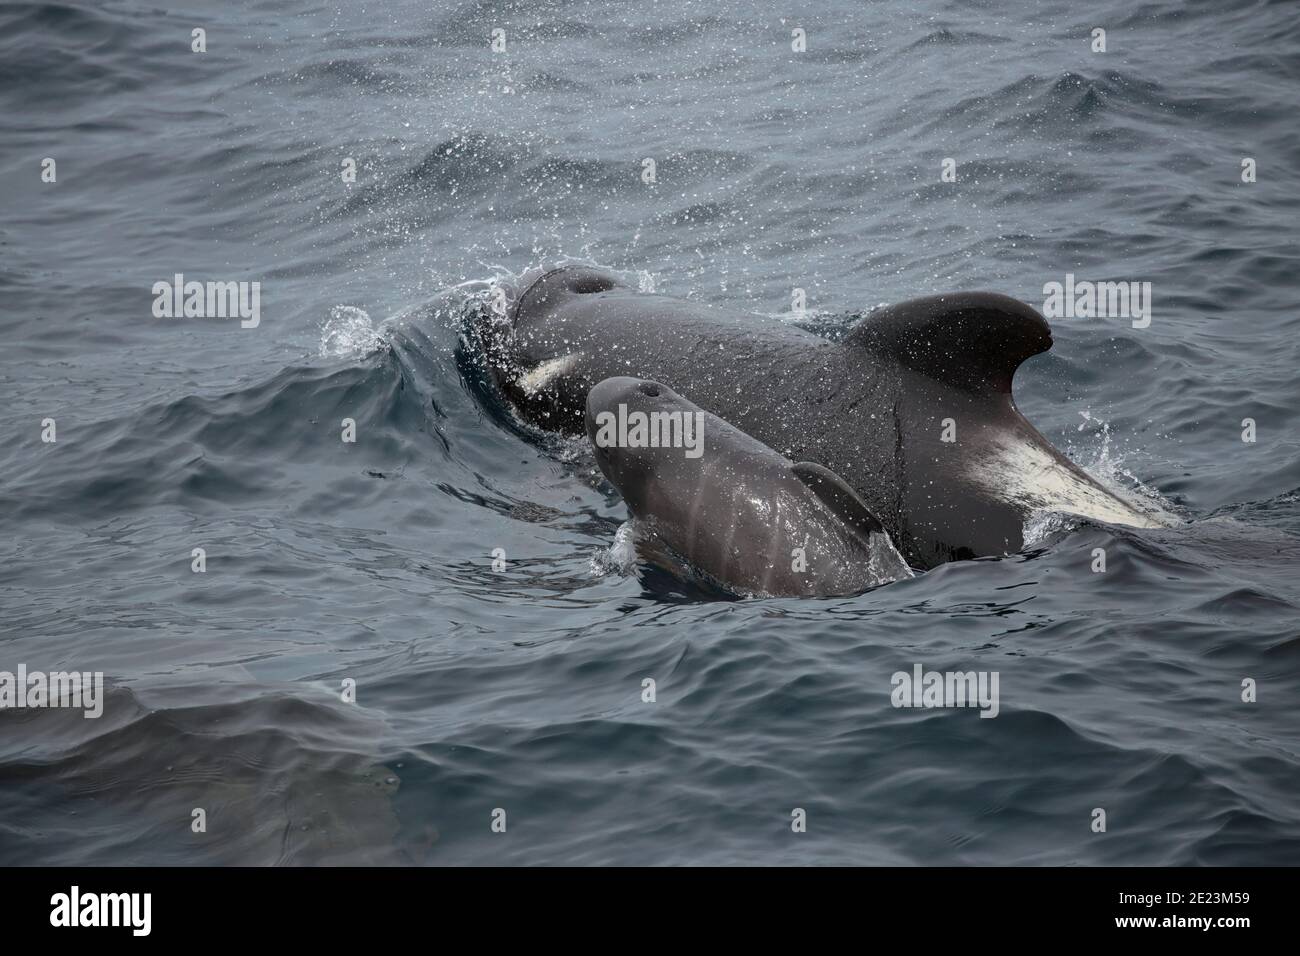 Long-finned Pilot Whale (Globicephalus melas), calf with adult, at sea, South Atlantic Ocean 2nd Dec 2015 Stock Photo